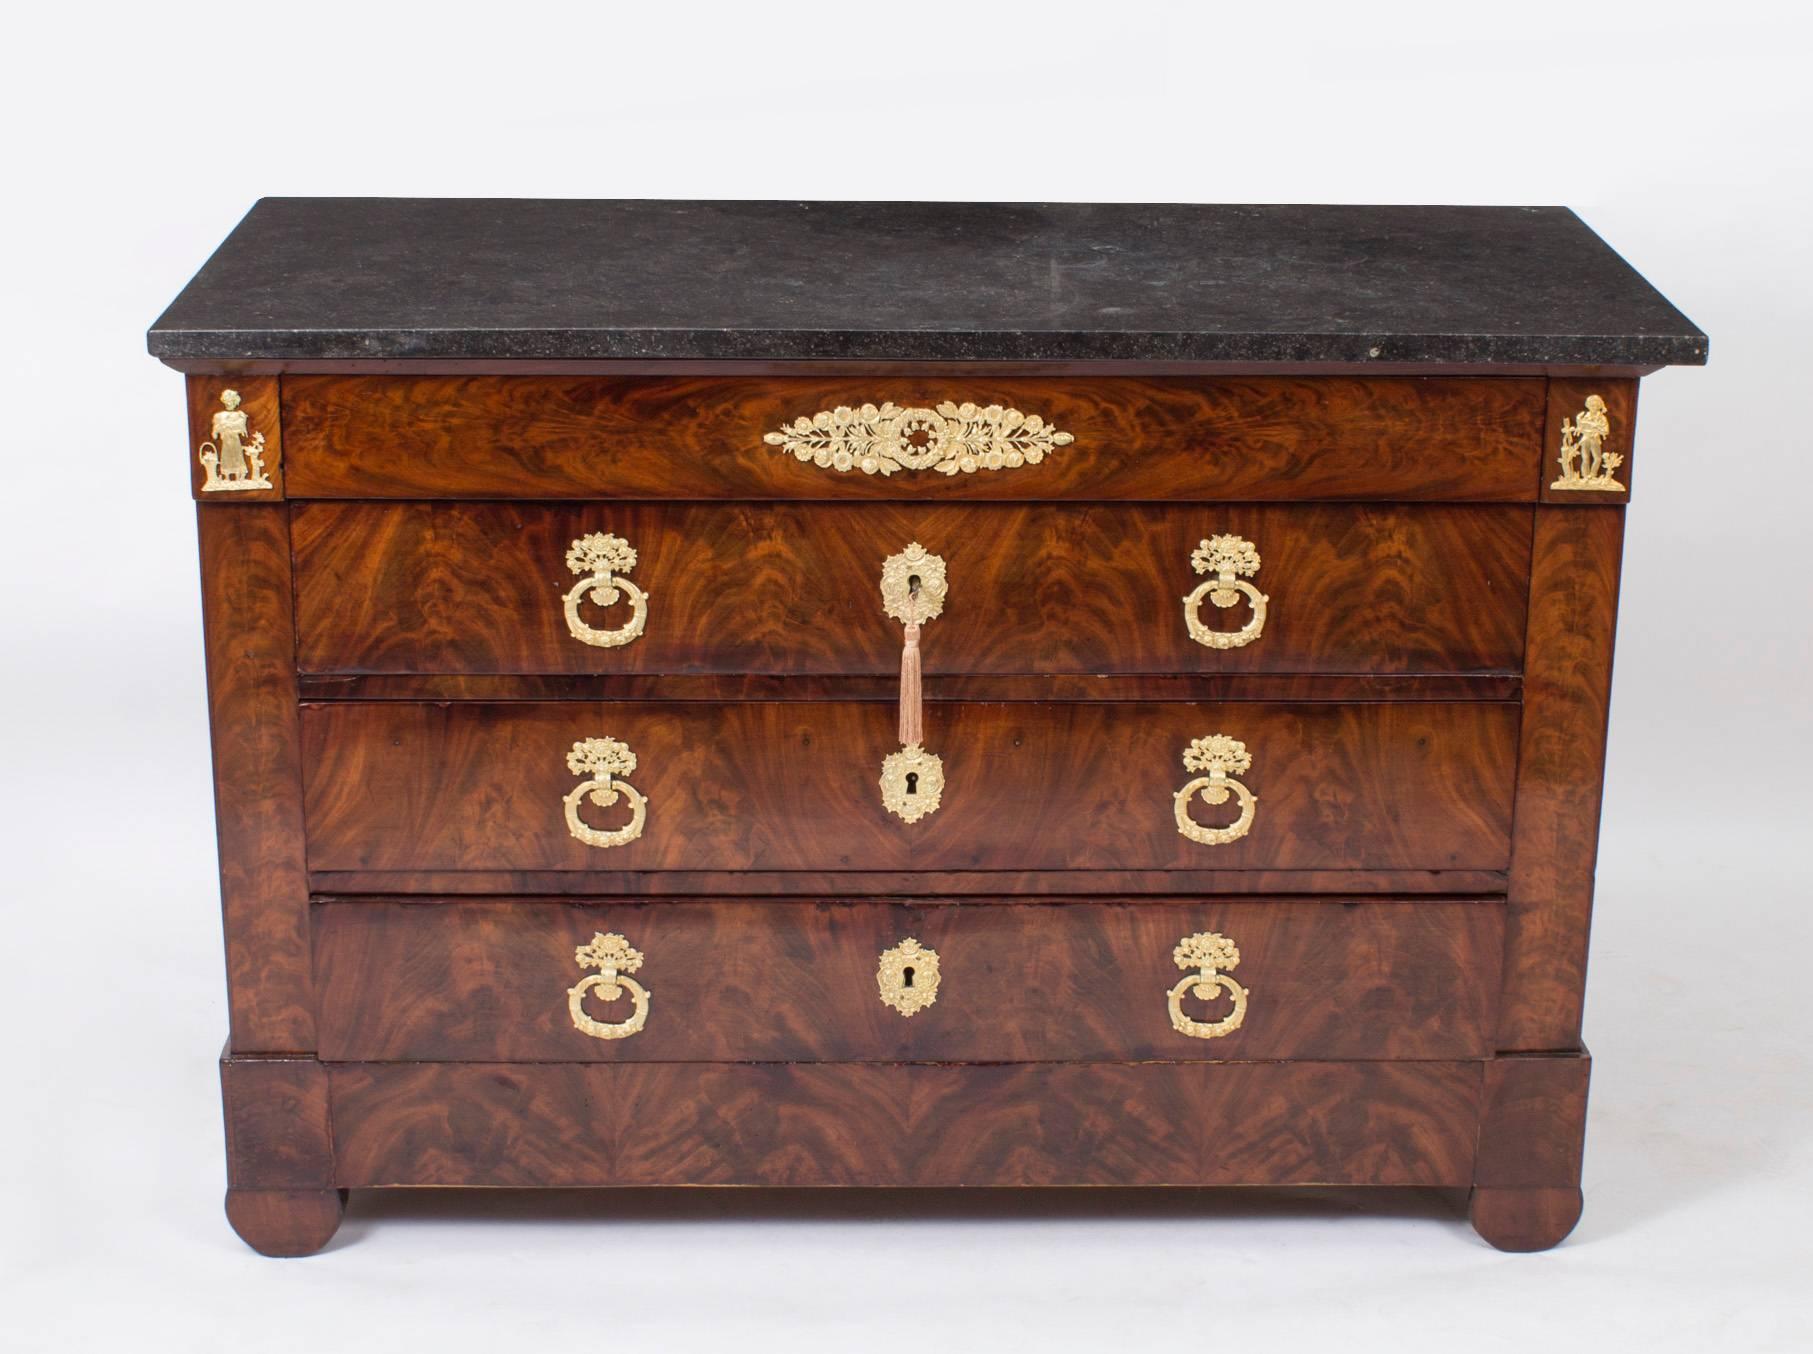 This is a stunning antique French restoration period flame mahogany commode, circa 1820 in date.

It has a frieze drawer over three large and capacious full width drawers, all with the most wonderful ormolu handles escutcheons and mounts, and it